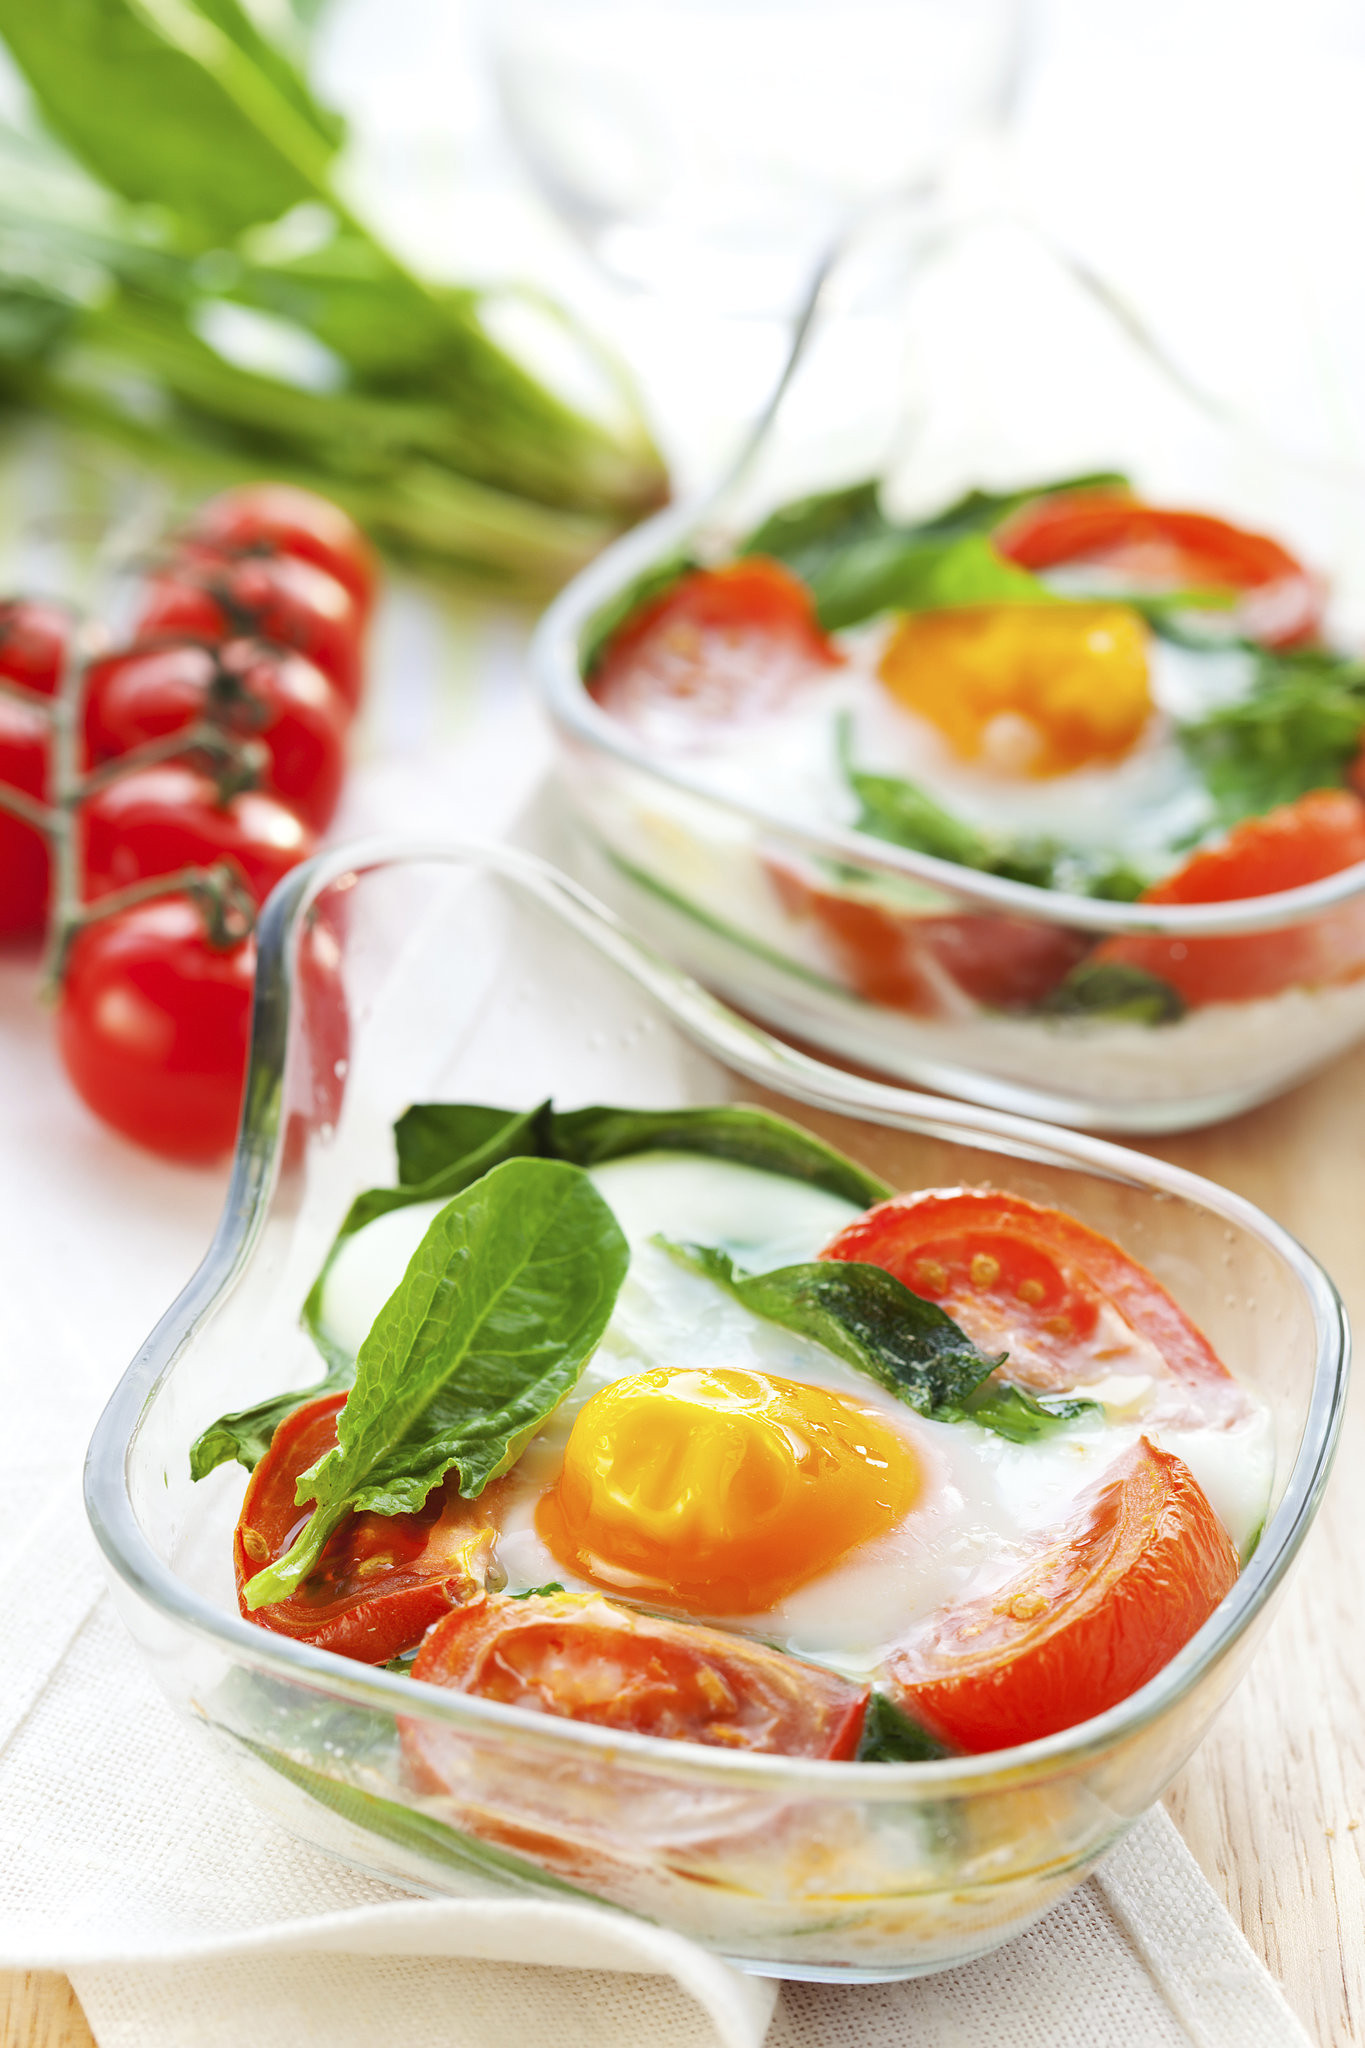 Healthy And Delicious Breakfast
 50 High Protein Breakfasts That Are Healthy And Delicious